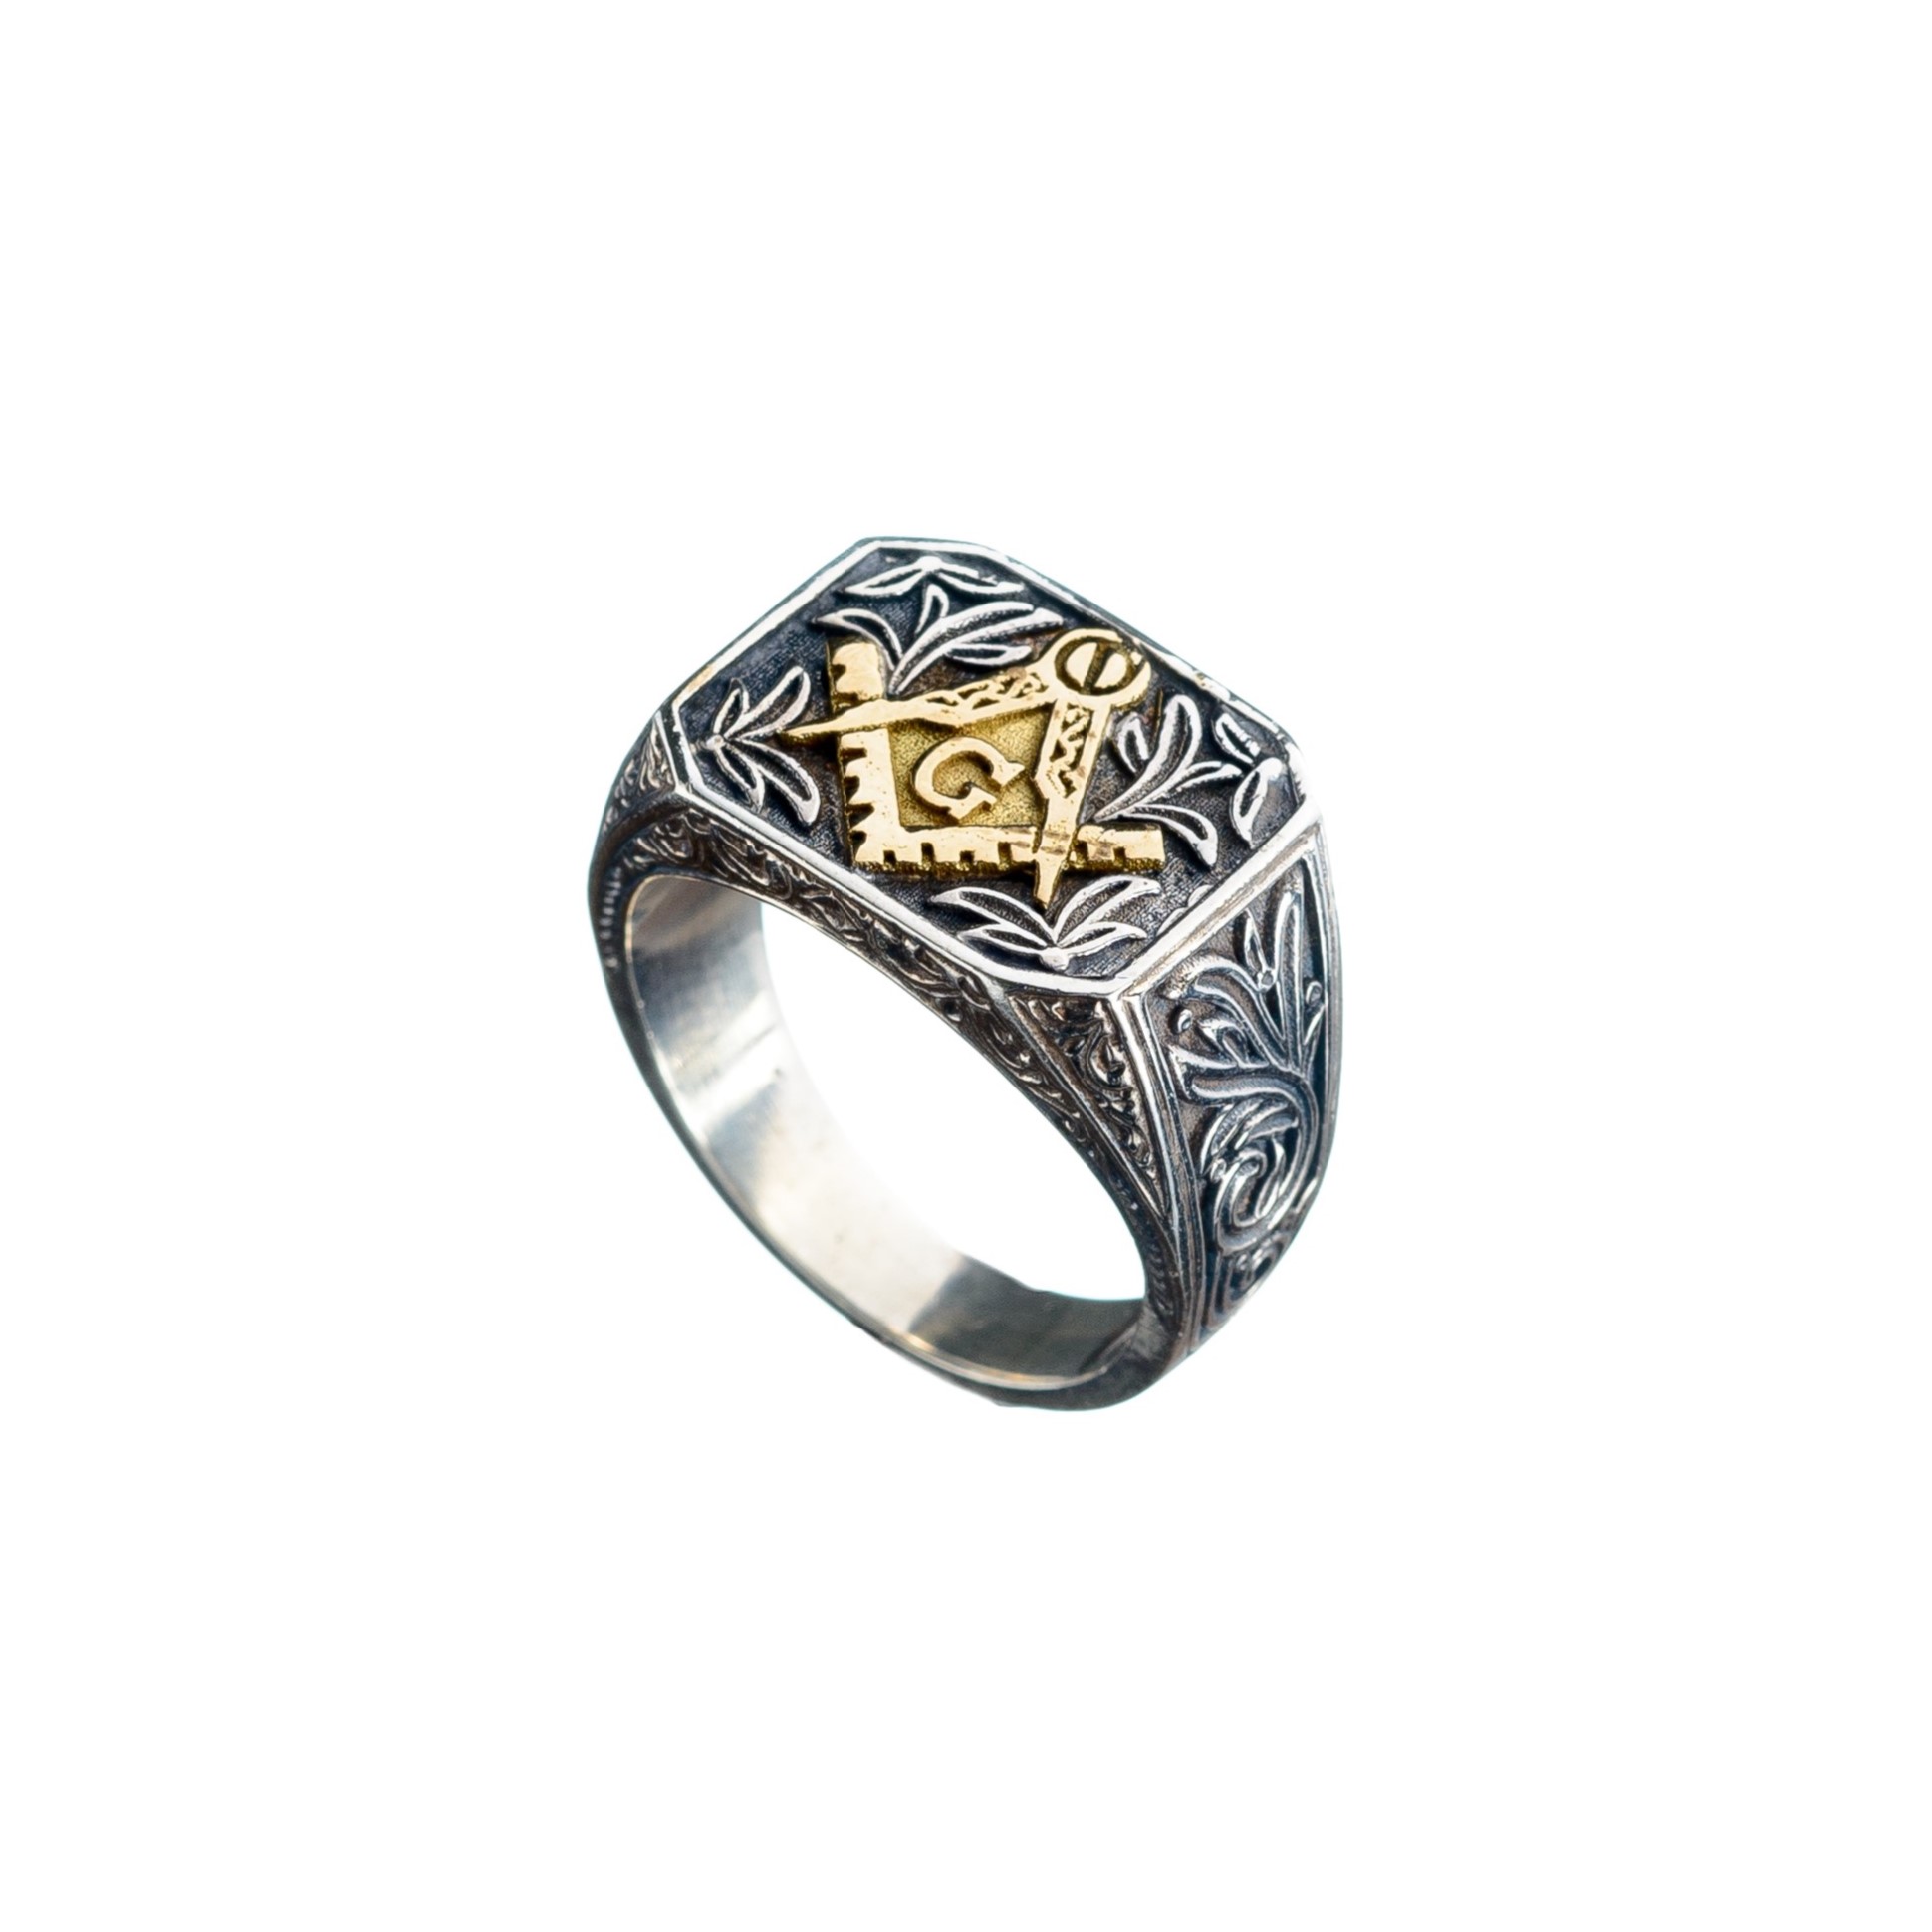 Masonic ring in 18K Gold and Sterling Silver